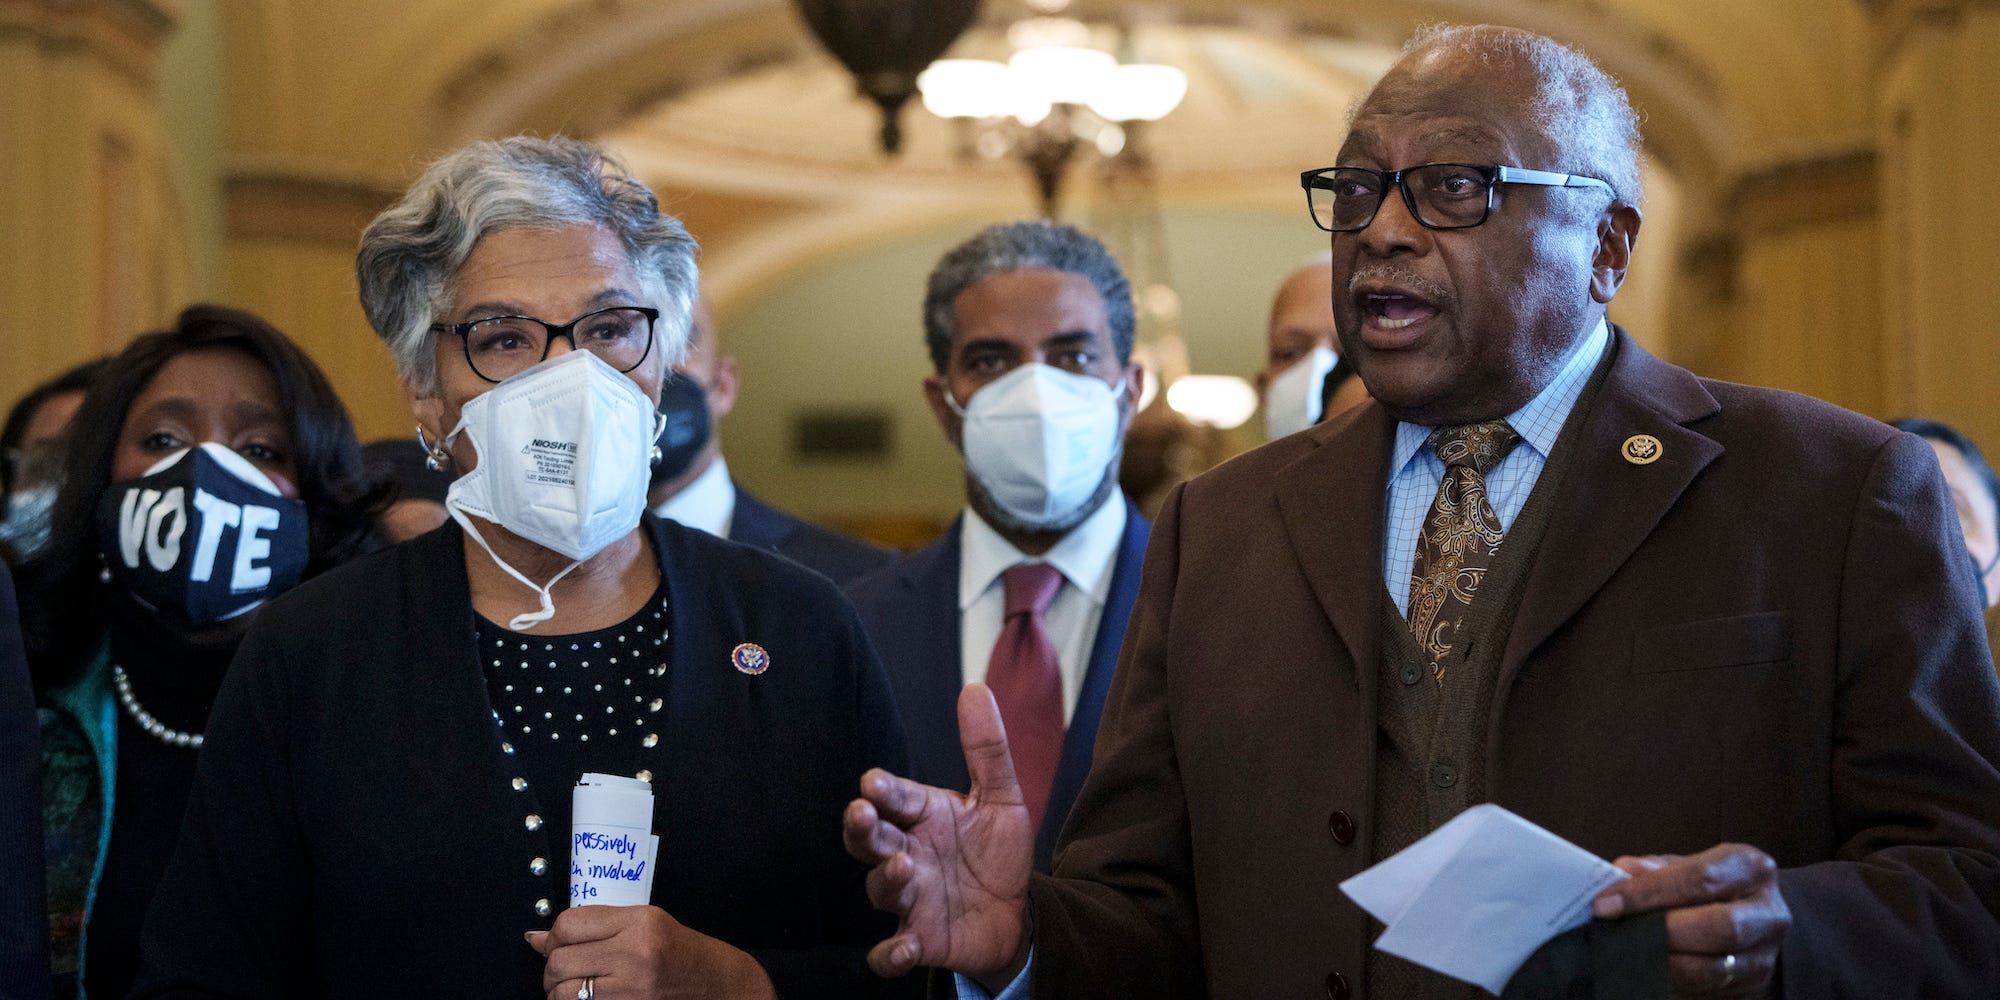 Standing with members of the Congressional Black Caucus, caucus chair Rep. Joyce Beatty (D-OH) and Rep. James Clyburn (D-SC) speak to reporters about voting rights outside of the Senate Chamber at the U.S. Capitol on January 19, 2022 in Washington, DC